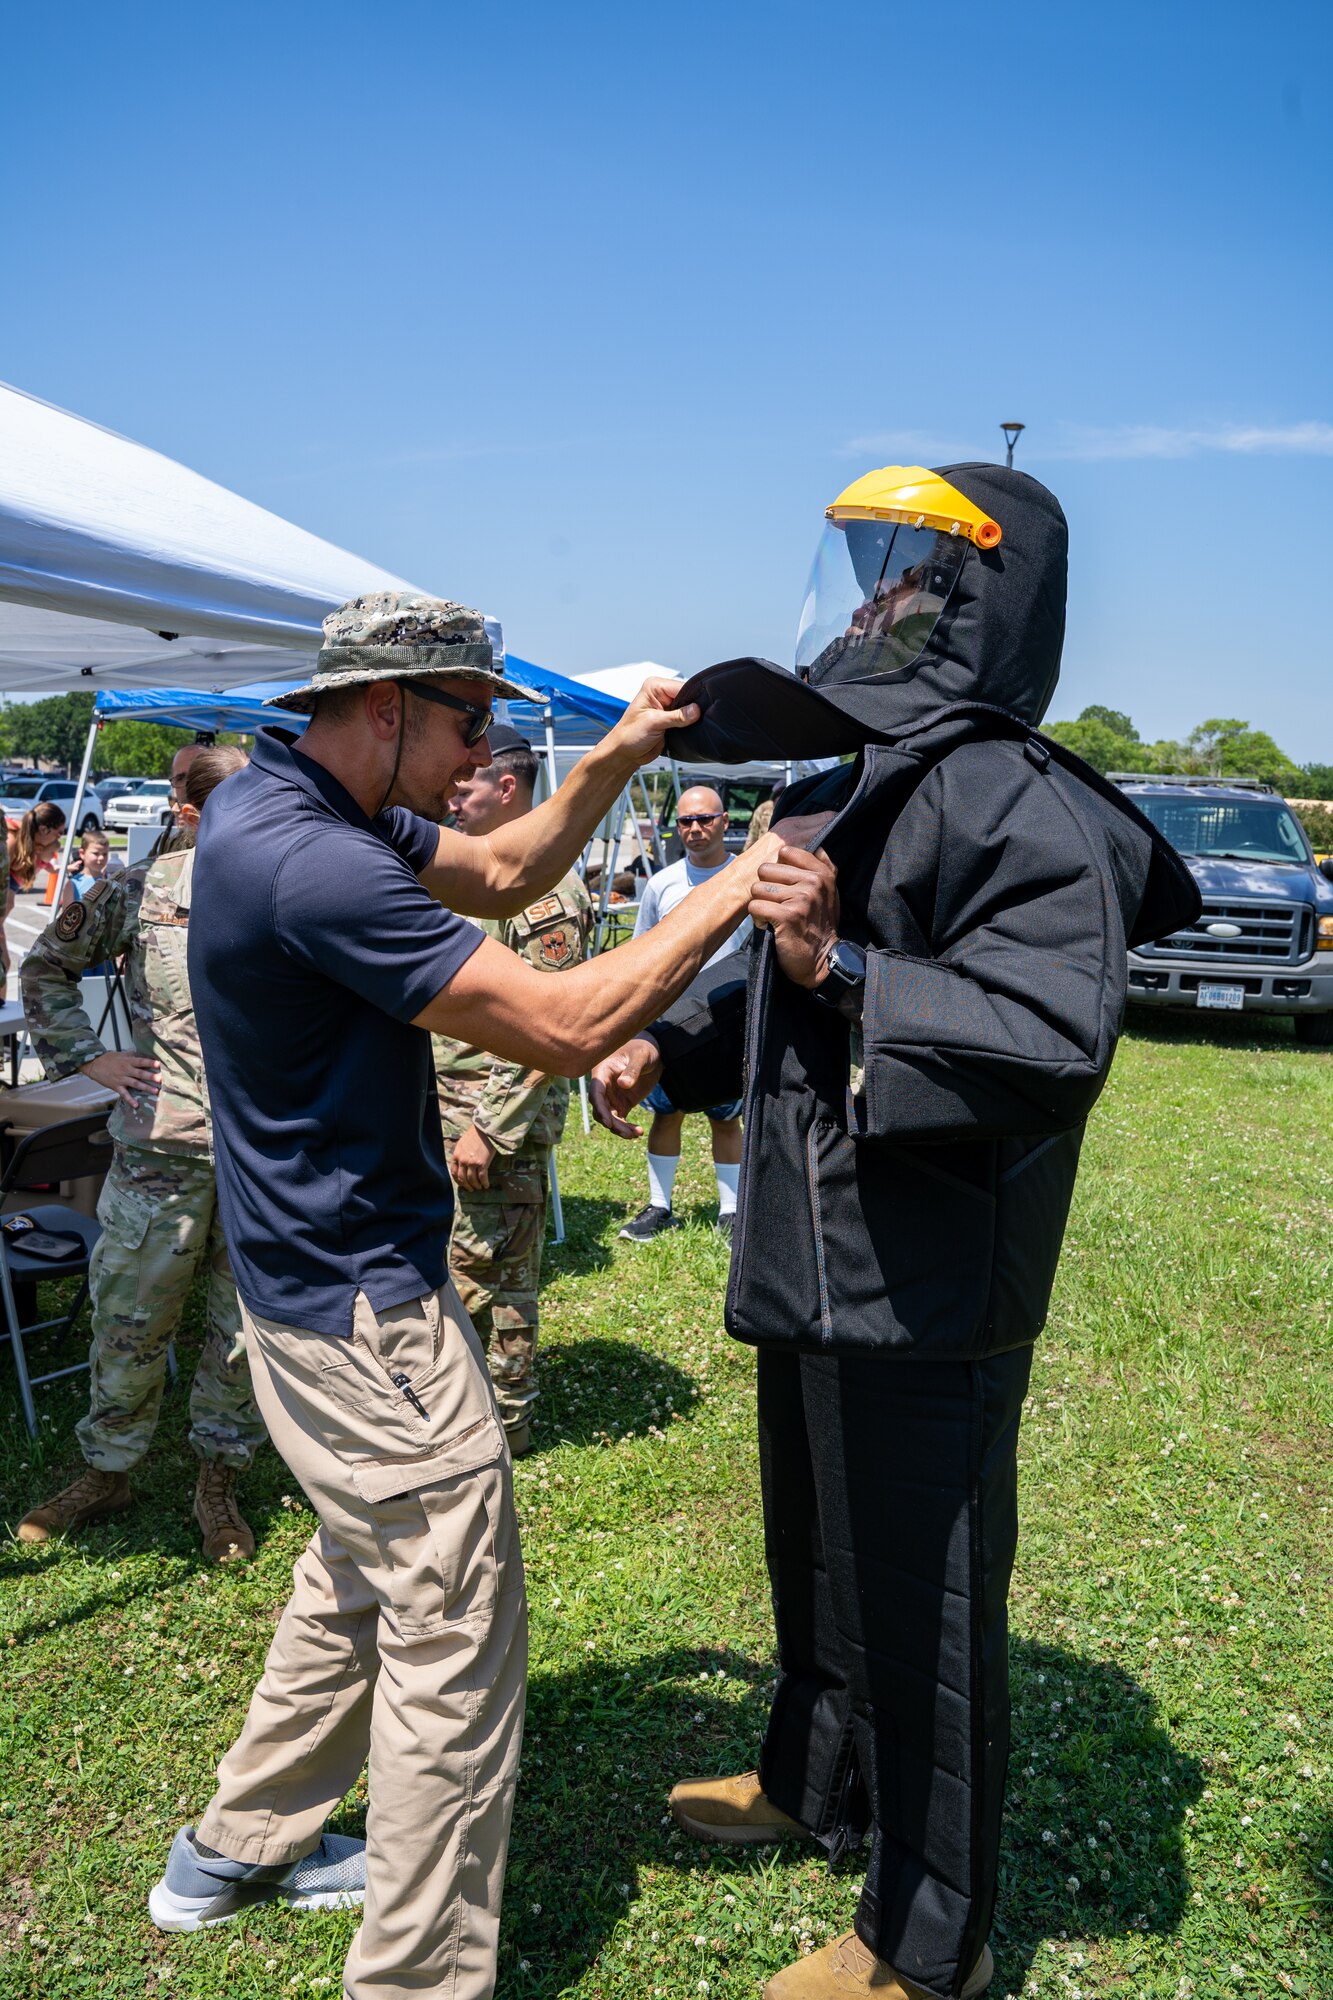 Justin Depew, 81st Security Forces Squadron training instructor, adjusts a taser simulation training suit for U.S. Air Force Staff Sgt. Jeffrey Wilson, 81st SFS flight sergeant, during a demonstration for National Police Week at Keesler Air Force Base, Mississippi, May 16, 2023.